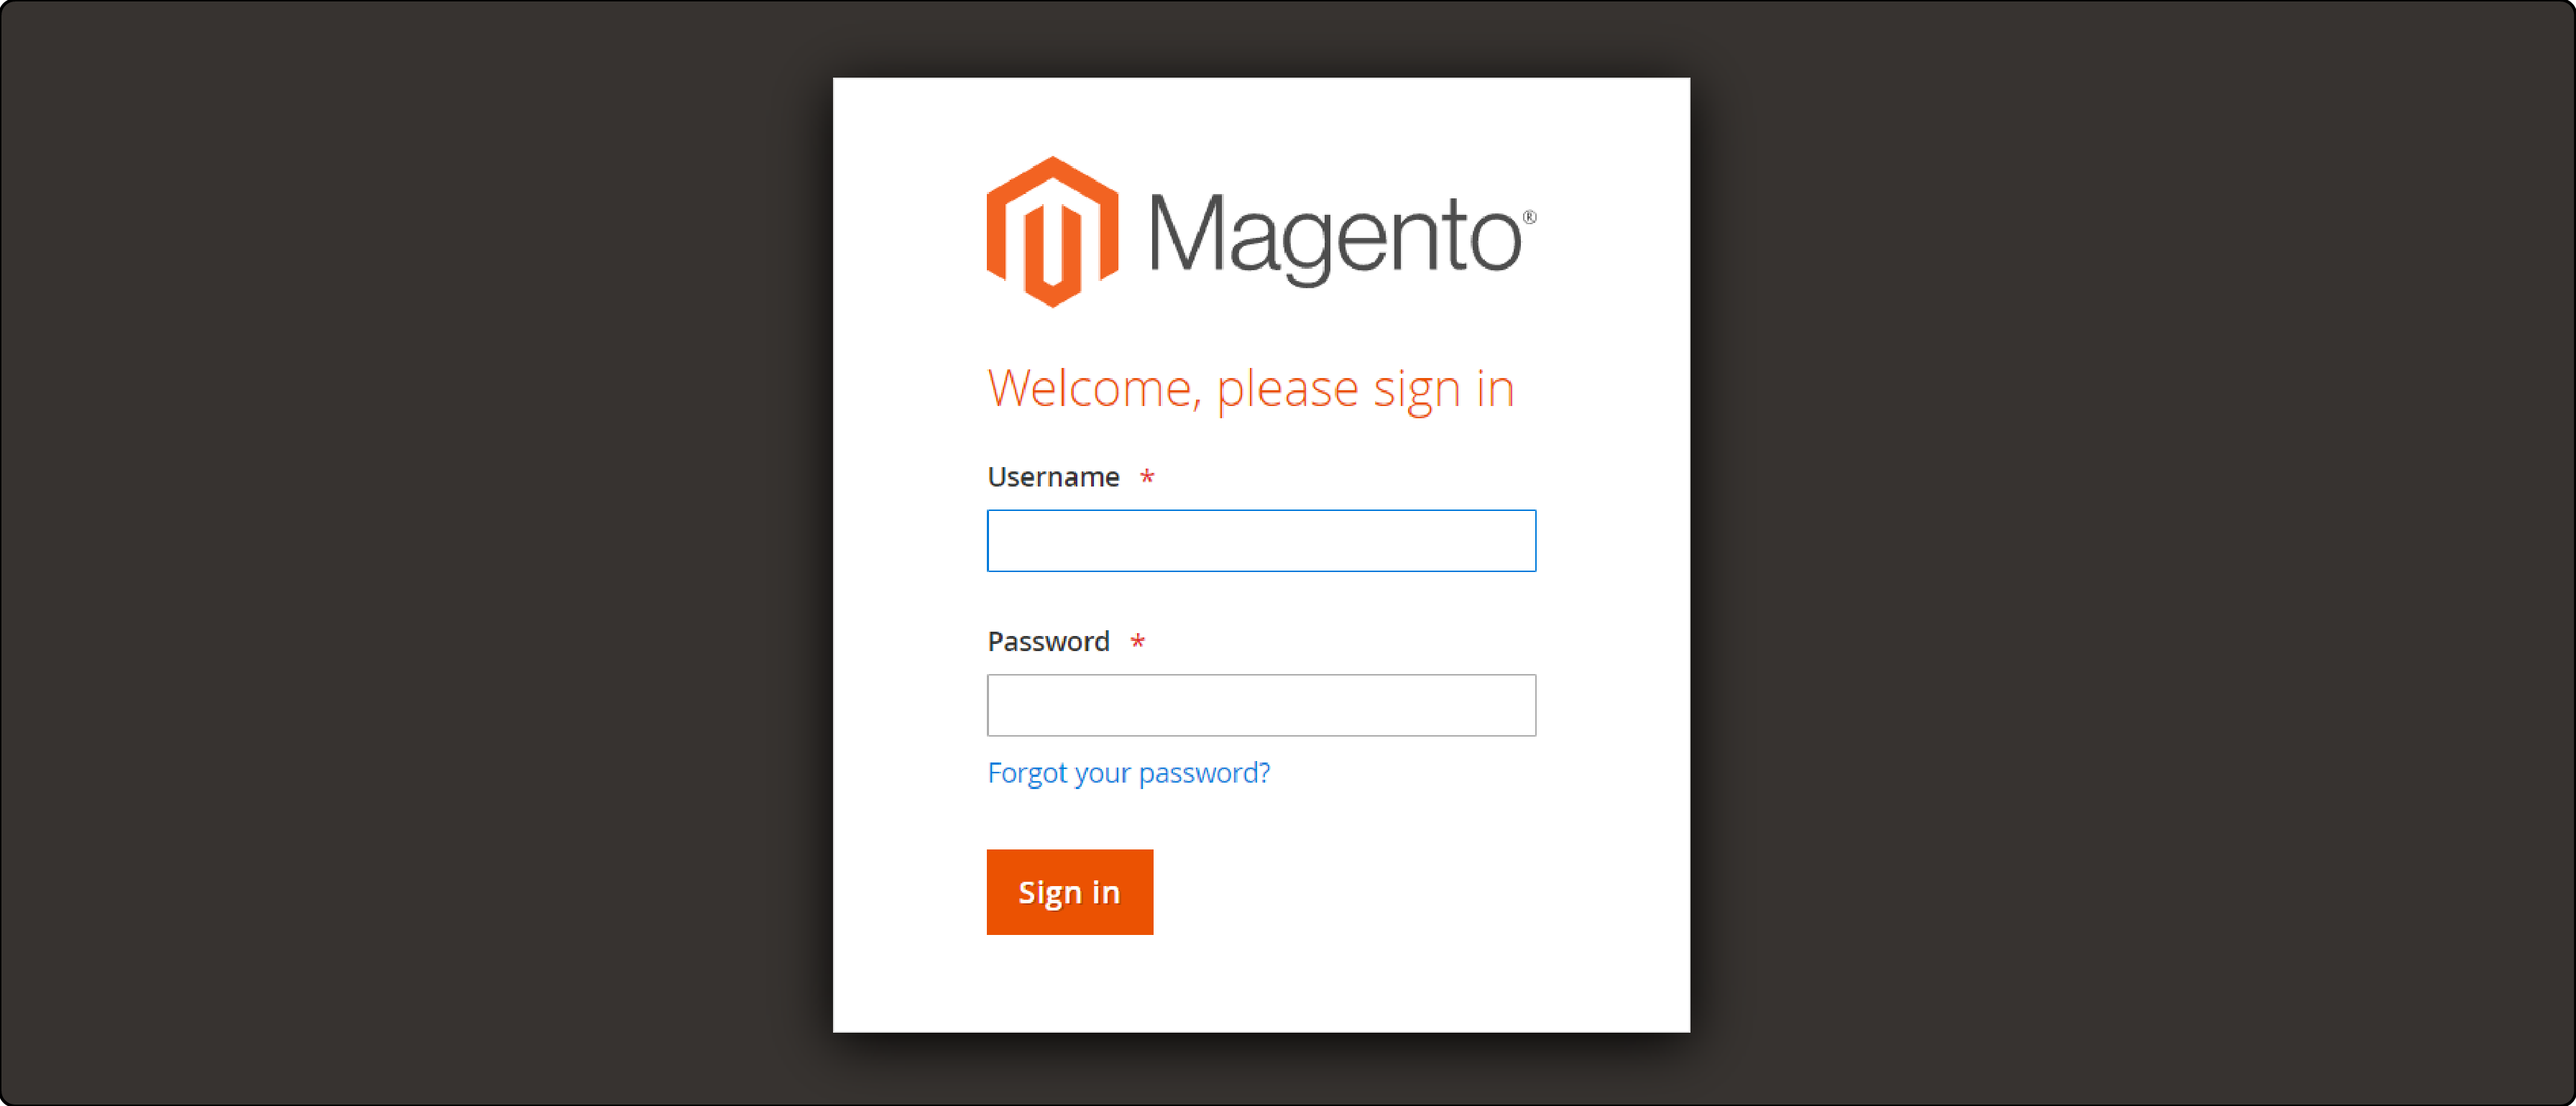 How Do You Configure Full-page Cache in Magento 2-Admin Panel